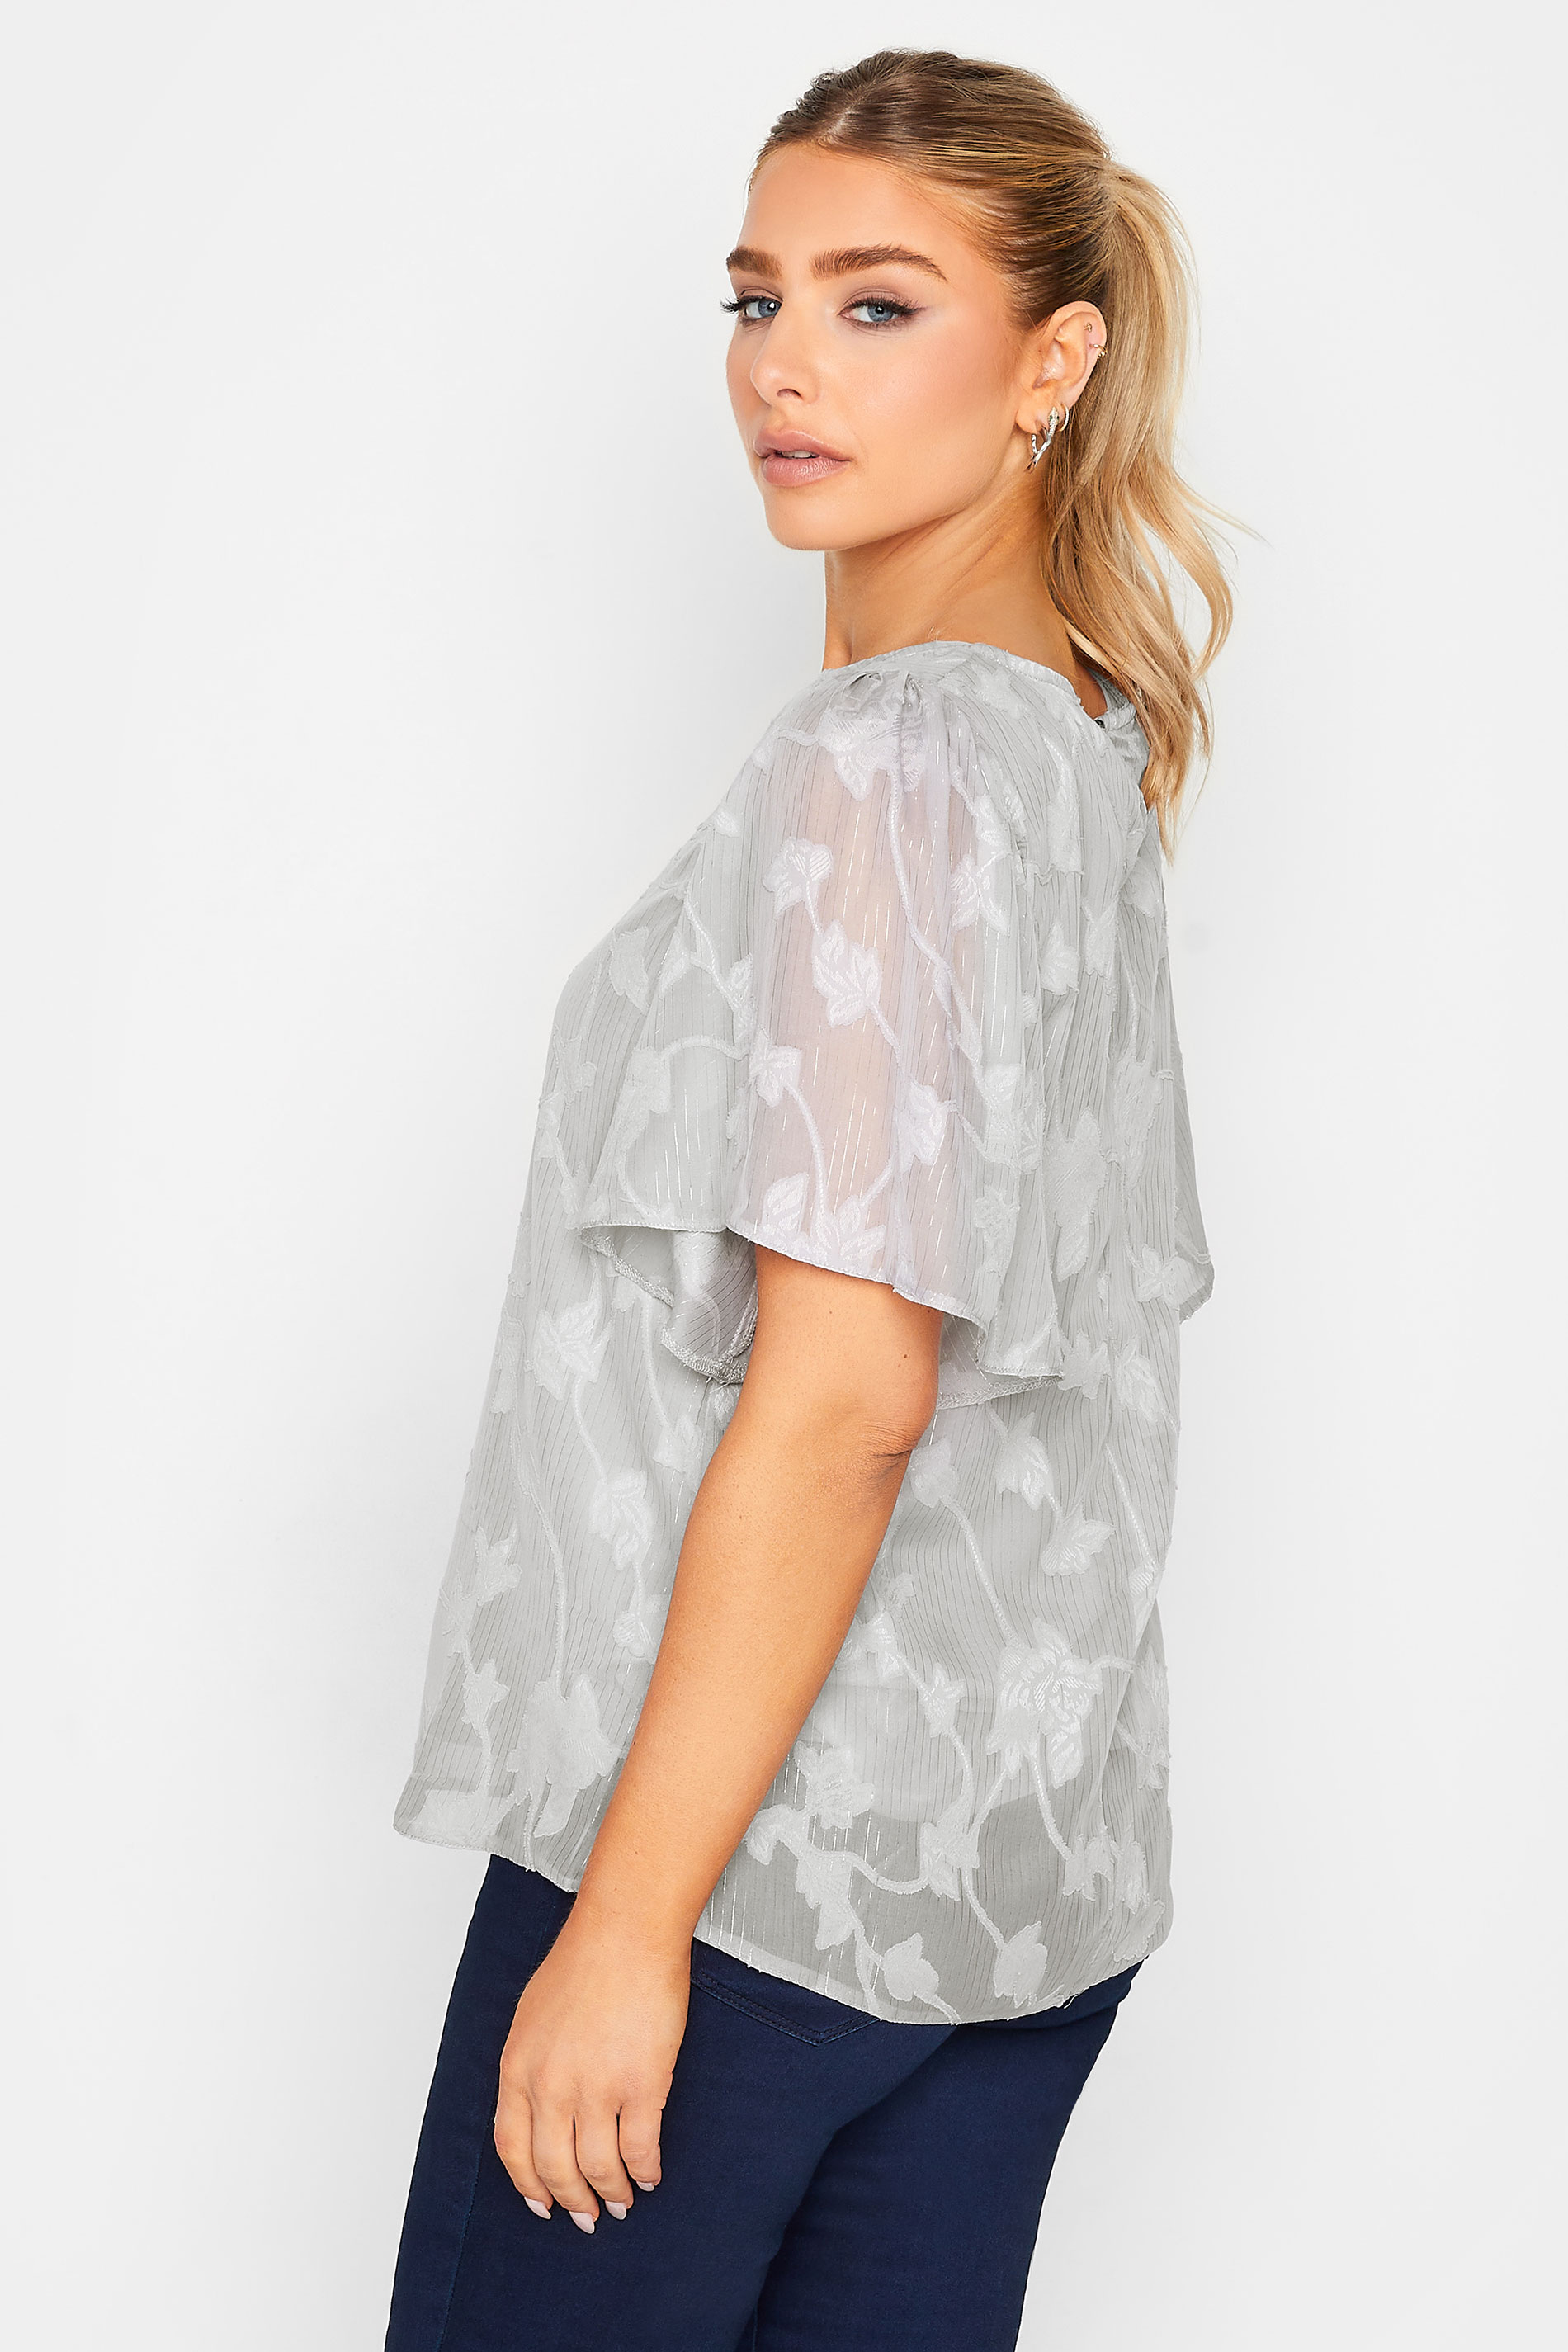 M&Co Grey Floral Shimmer Angel Sleeve Blouse | M&Co 3